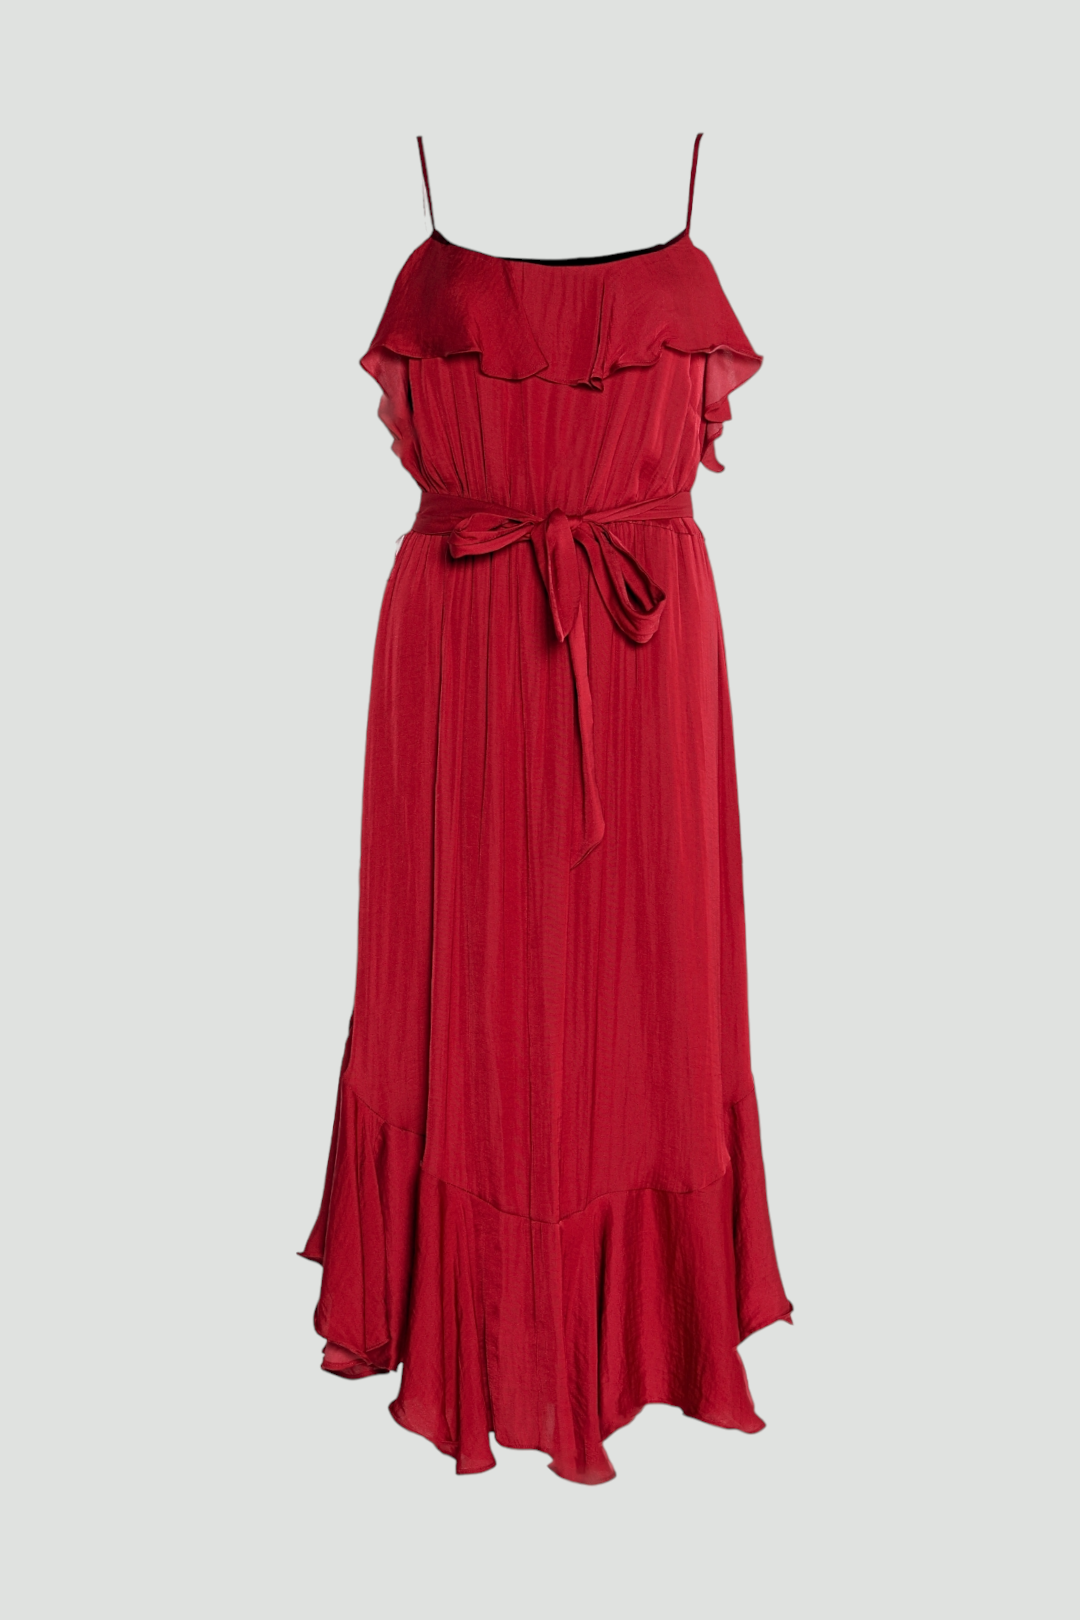 Forever New in Red Ruffle Dress with Waist Tie